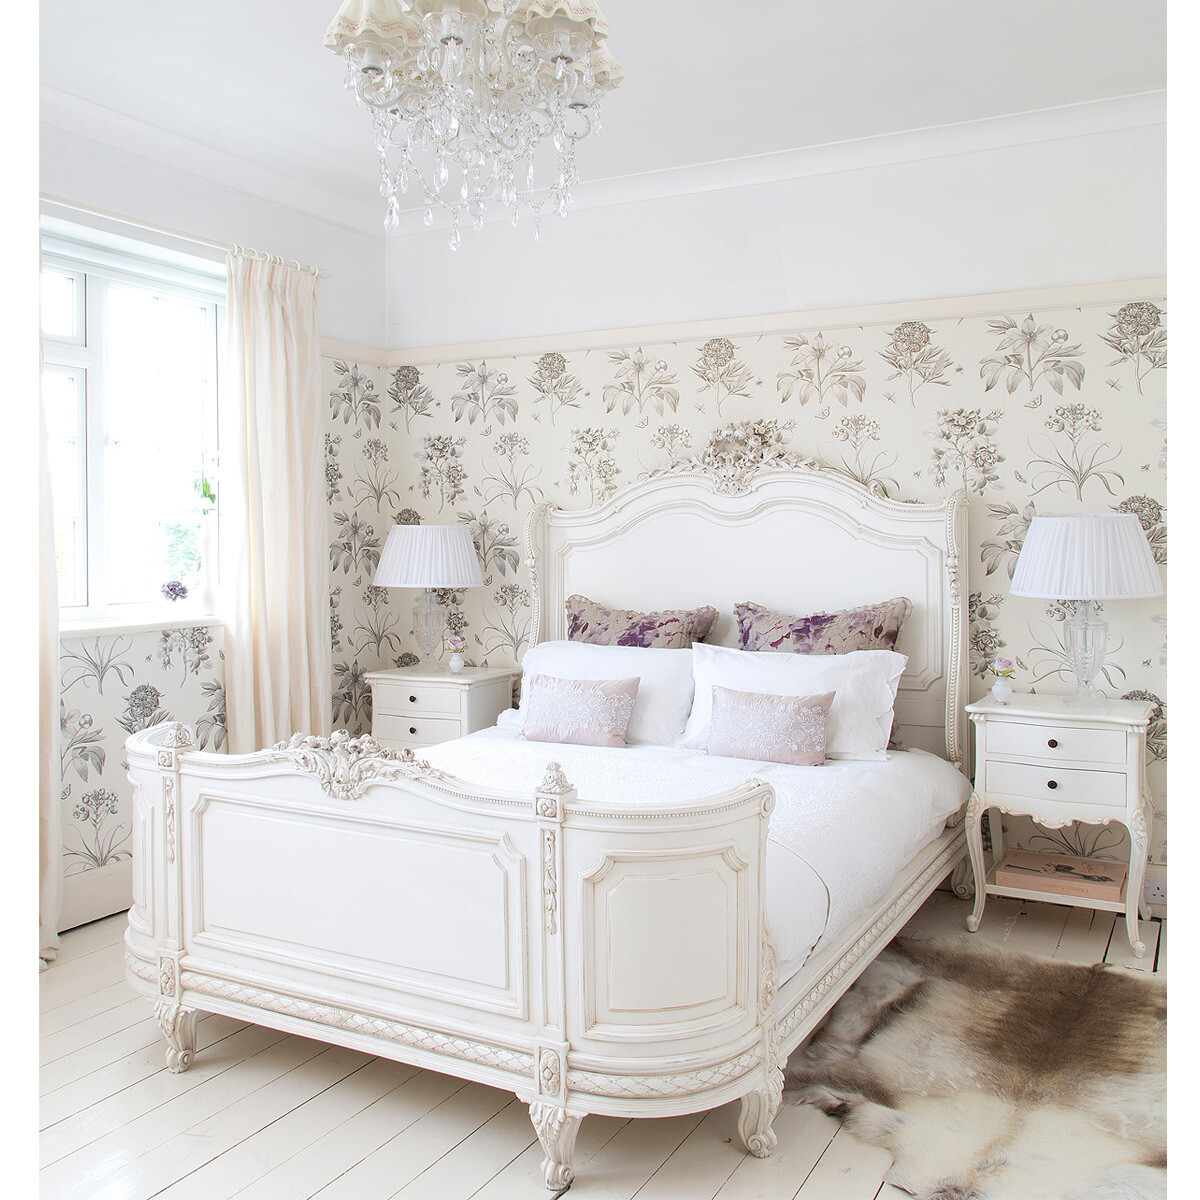 French bed - bonaparte provencal -The French Bedroom Company - www.homeworlddesign.com